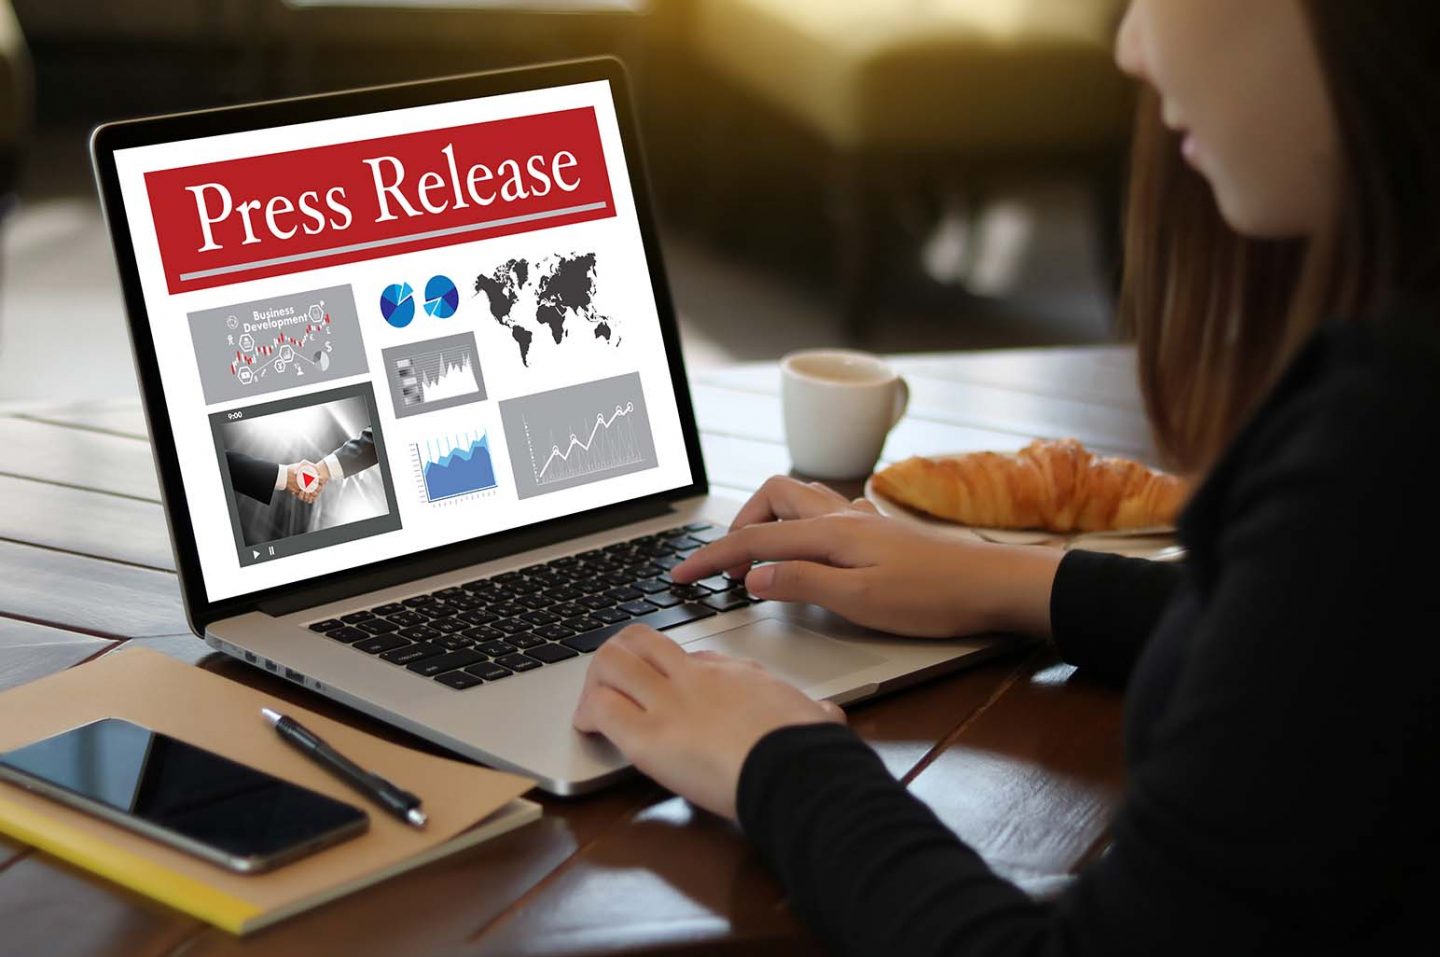 How Press Release Help Small Business